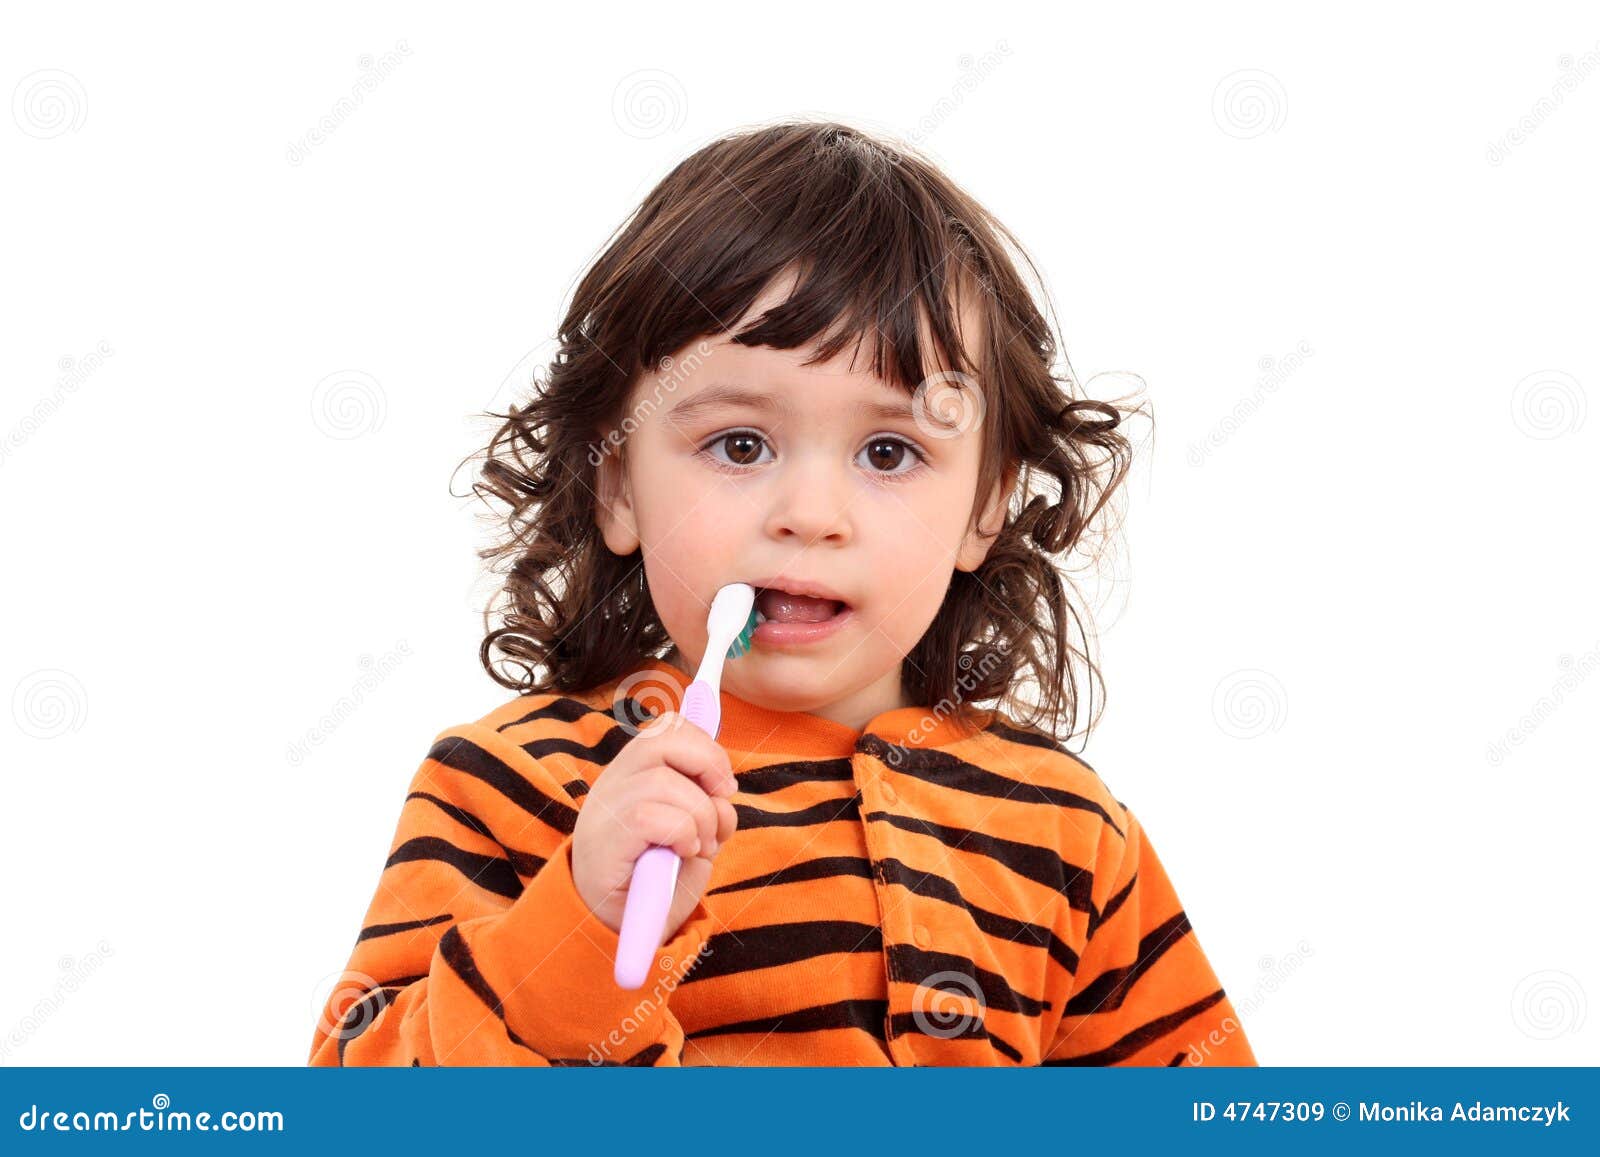 Girl And Toothbrush Stock Image Image Of Dentist Toothbrush 4747309